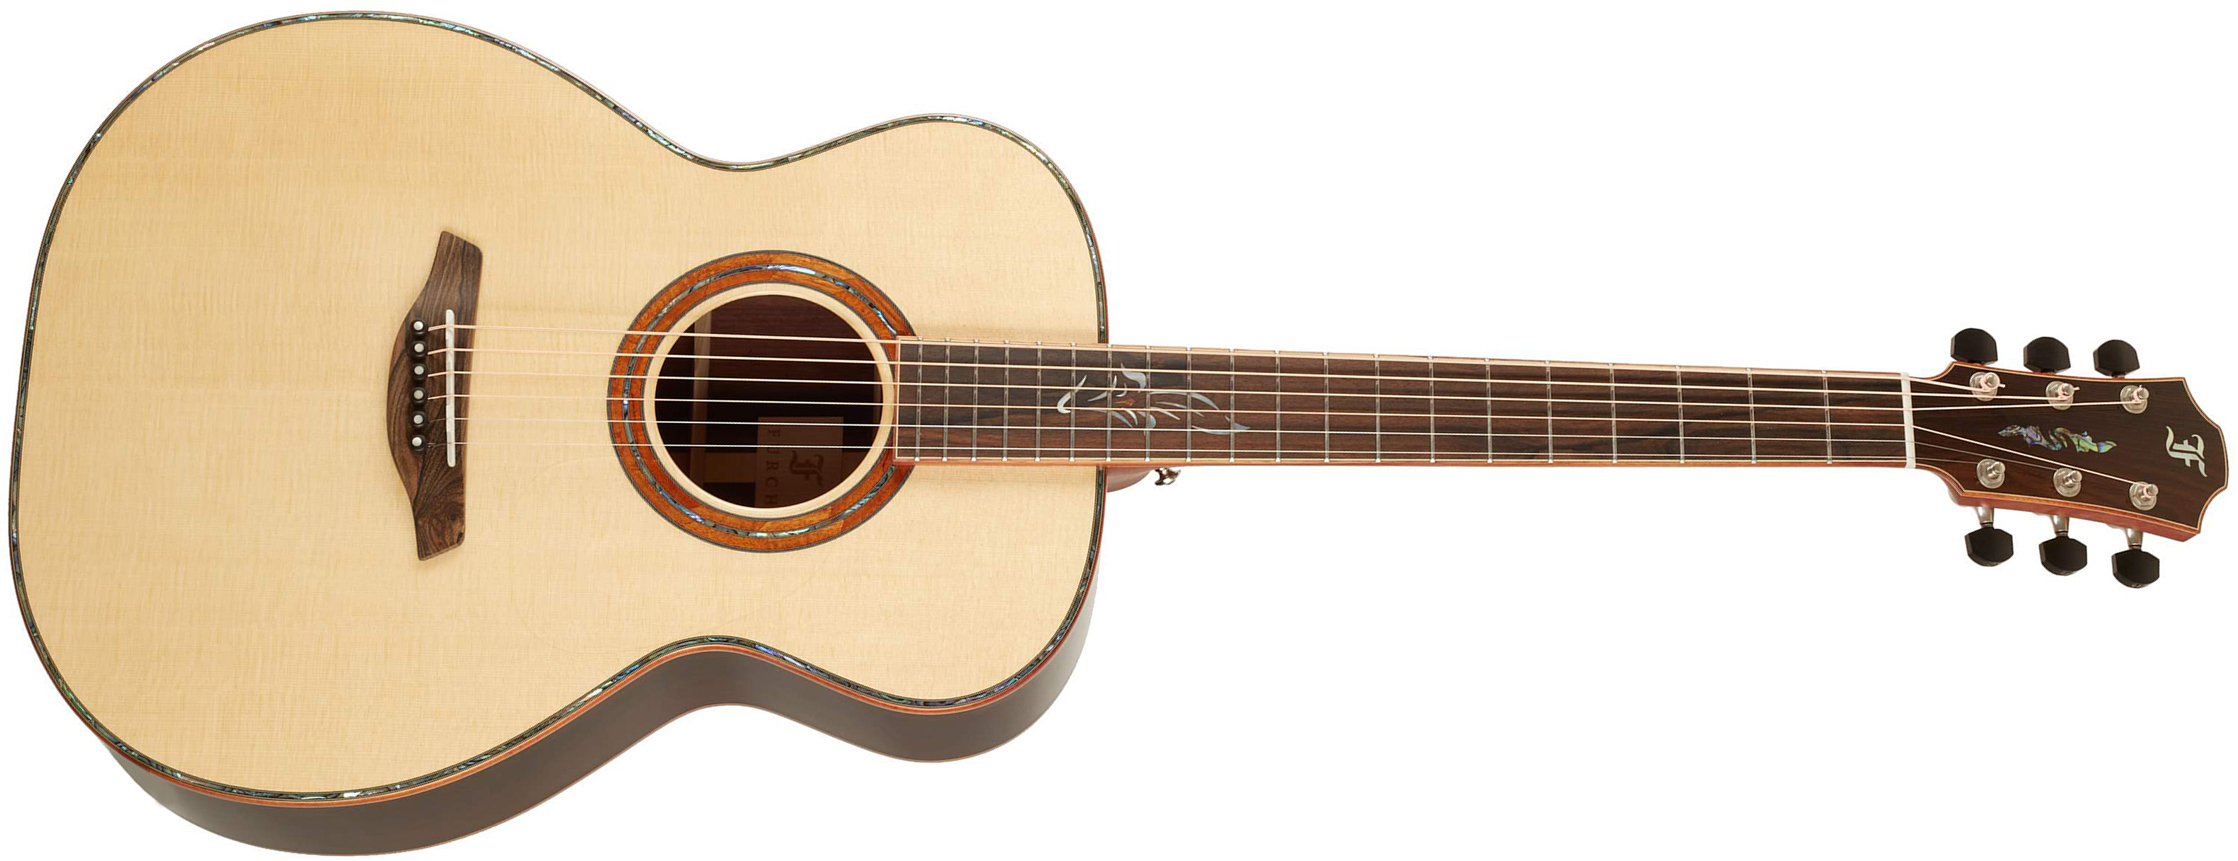 Furch Om-sr Red Orchestra Model Epicea Palissandre Eb Lrb1 - Natural - Acoustic guitar & electro - Main picture